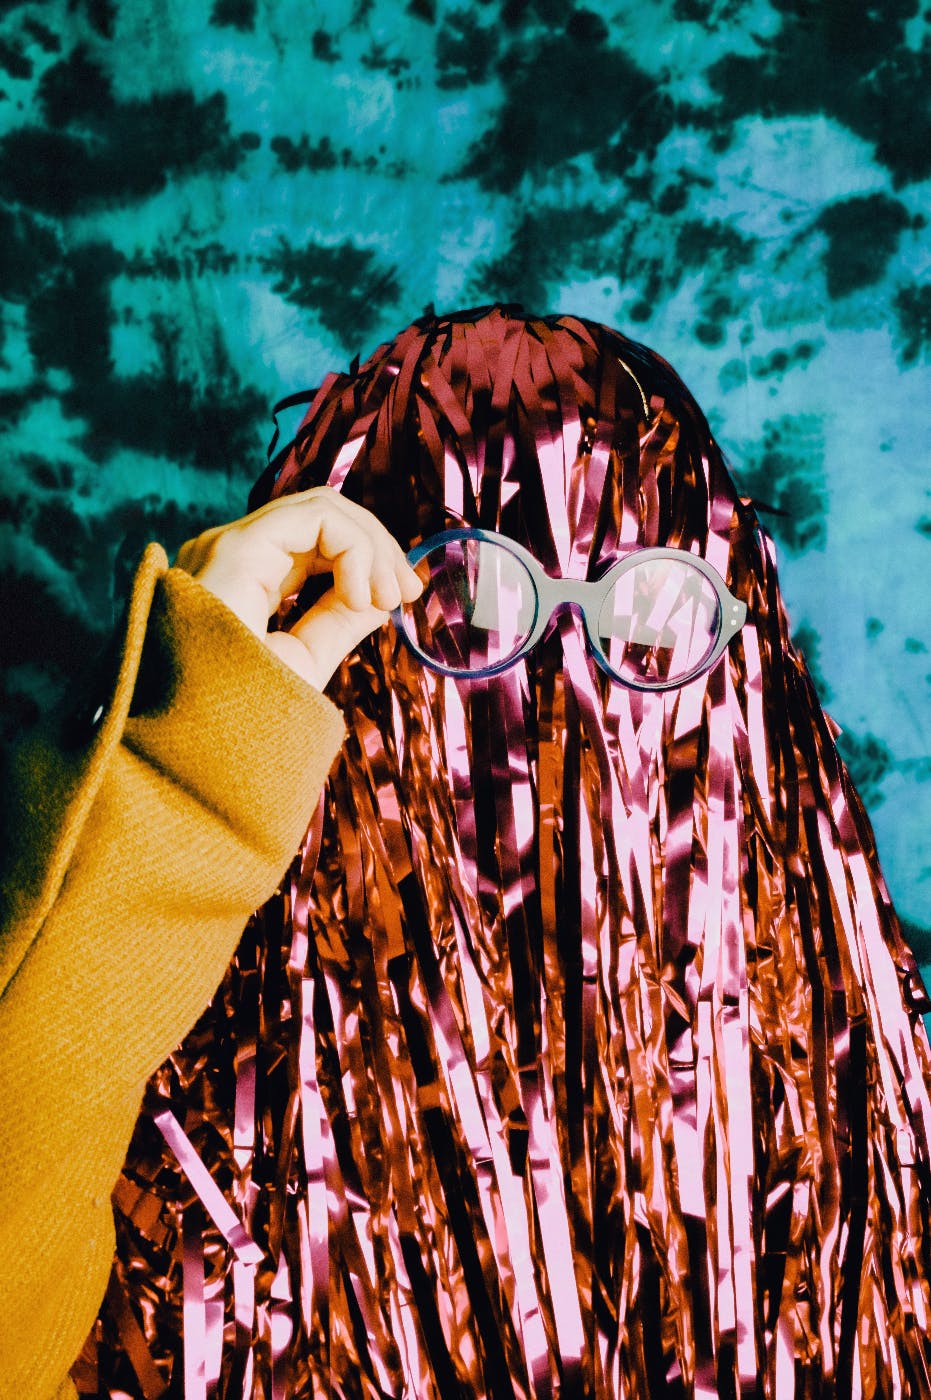 a girl with her face covered by red shimmering strands, putting on her glasses